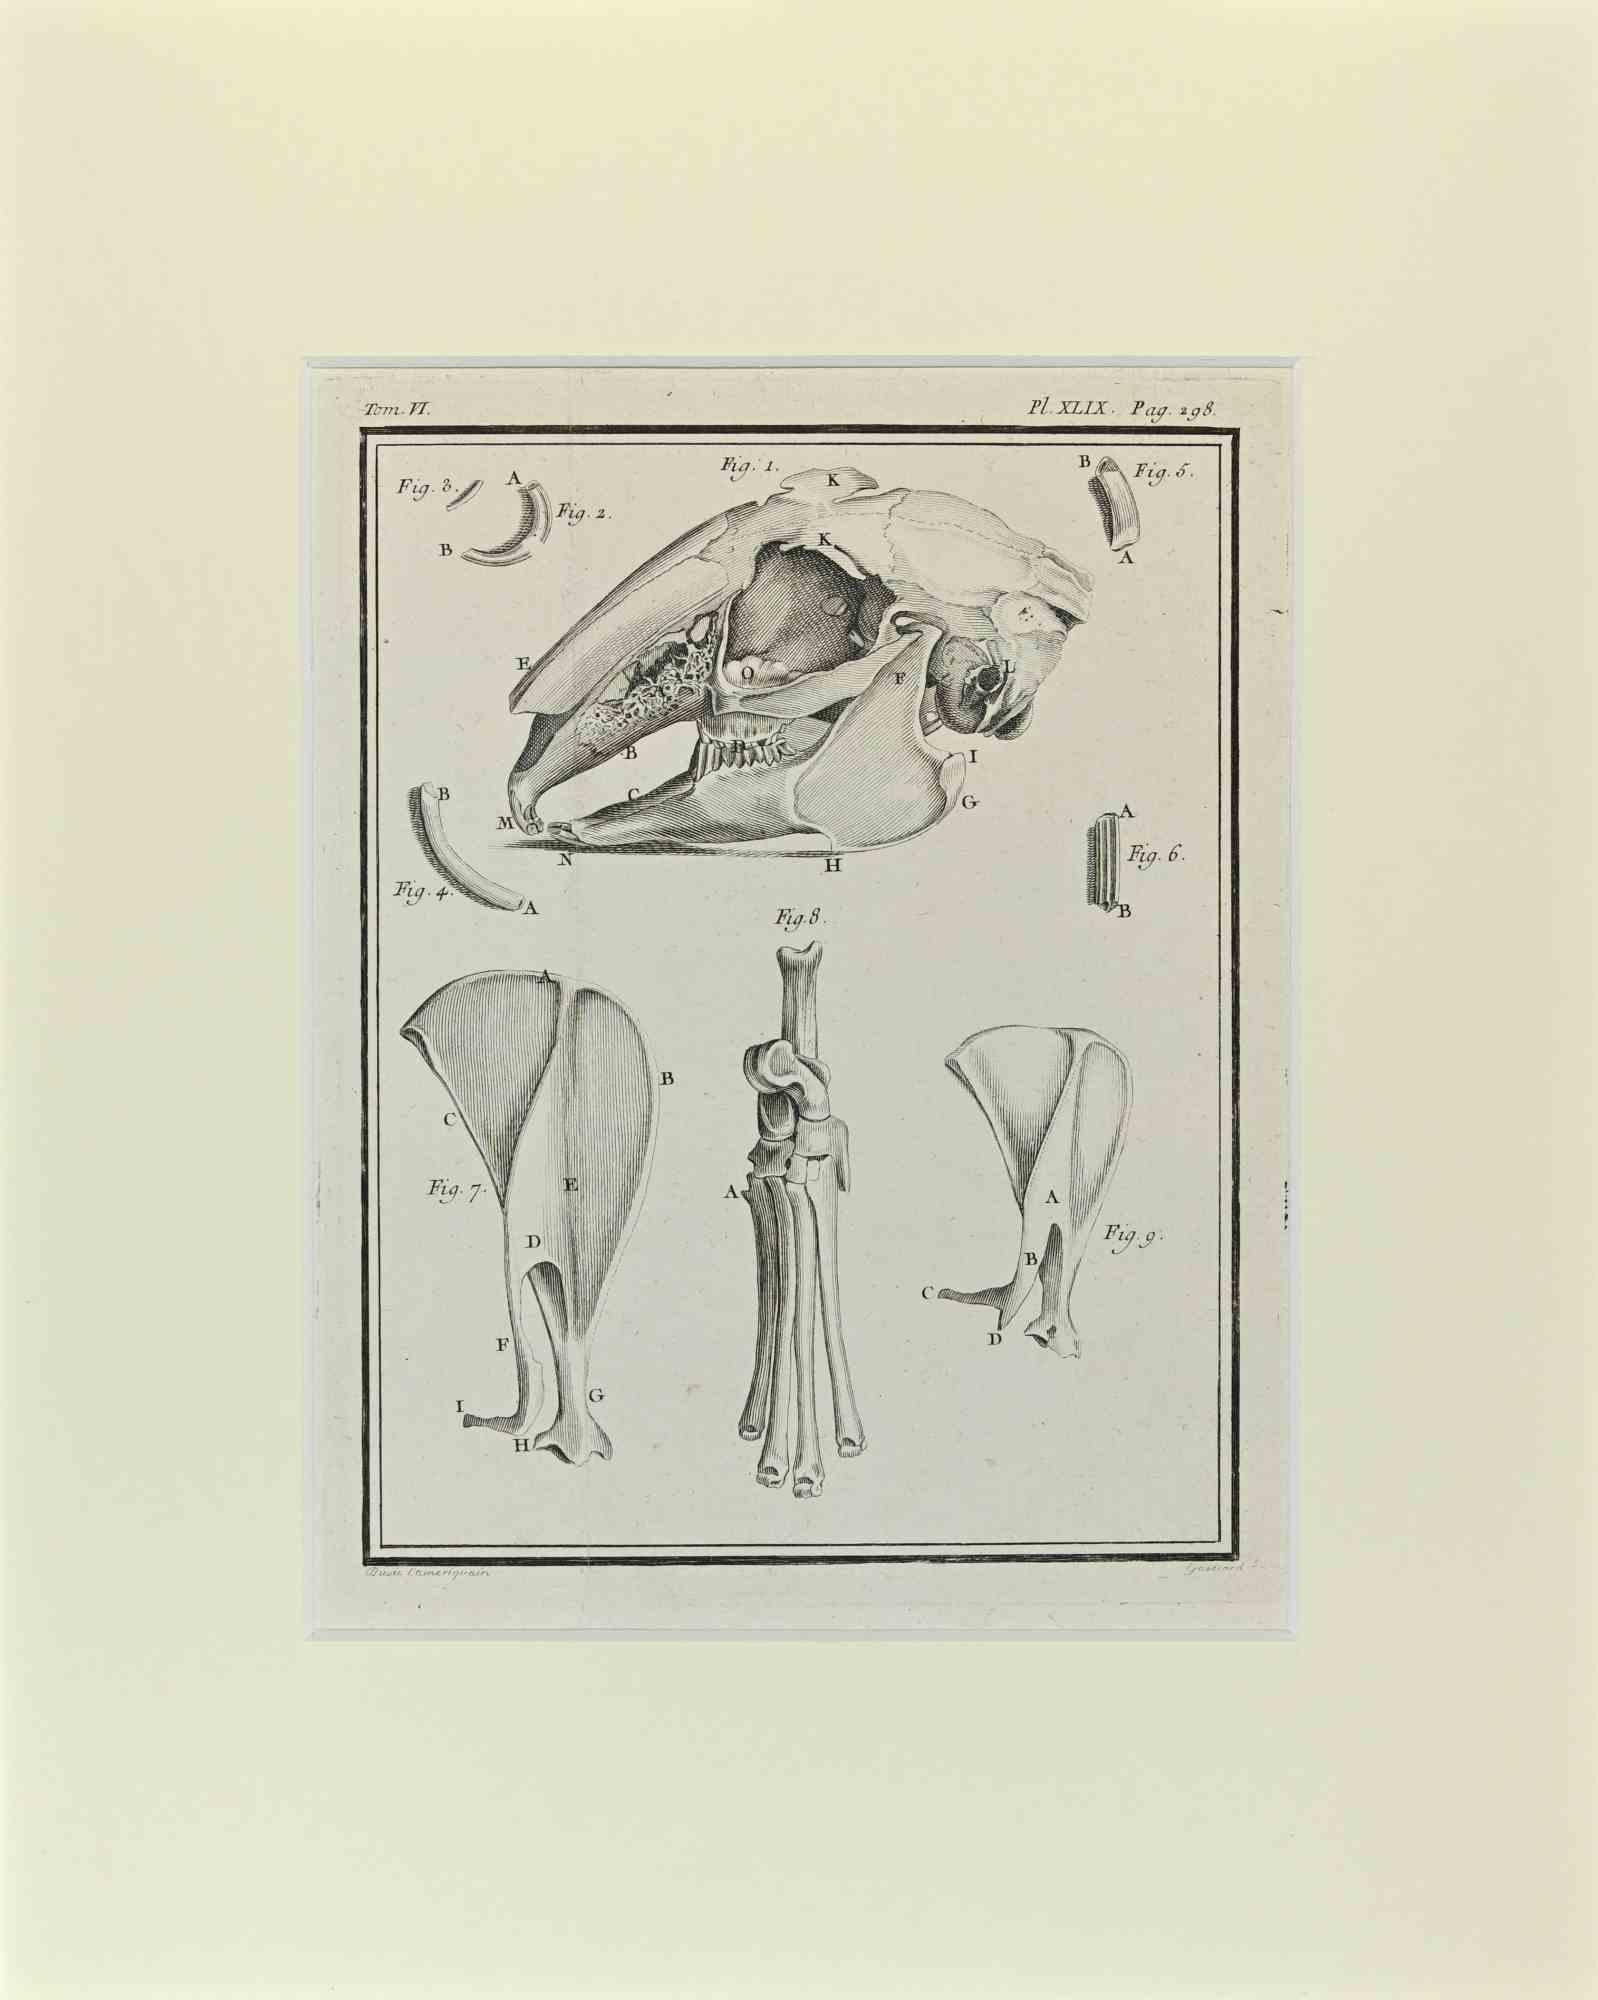 Rabbit Skeleton is an artwork realized  by  Buvée l'Américain in 1771.  

Etching B./W. print  on ivory paper. Signed on  plate on the lower left margin.

The work is glued on cardboard. Total dimensions: 35x28 cm.

The artwork belongs to the suite